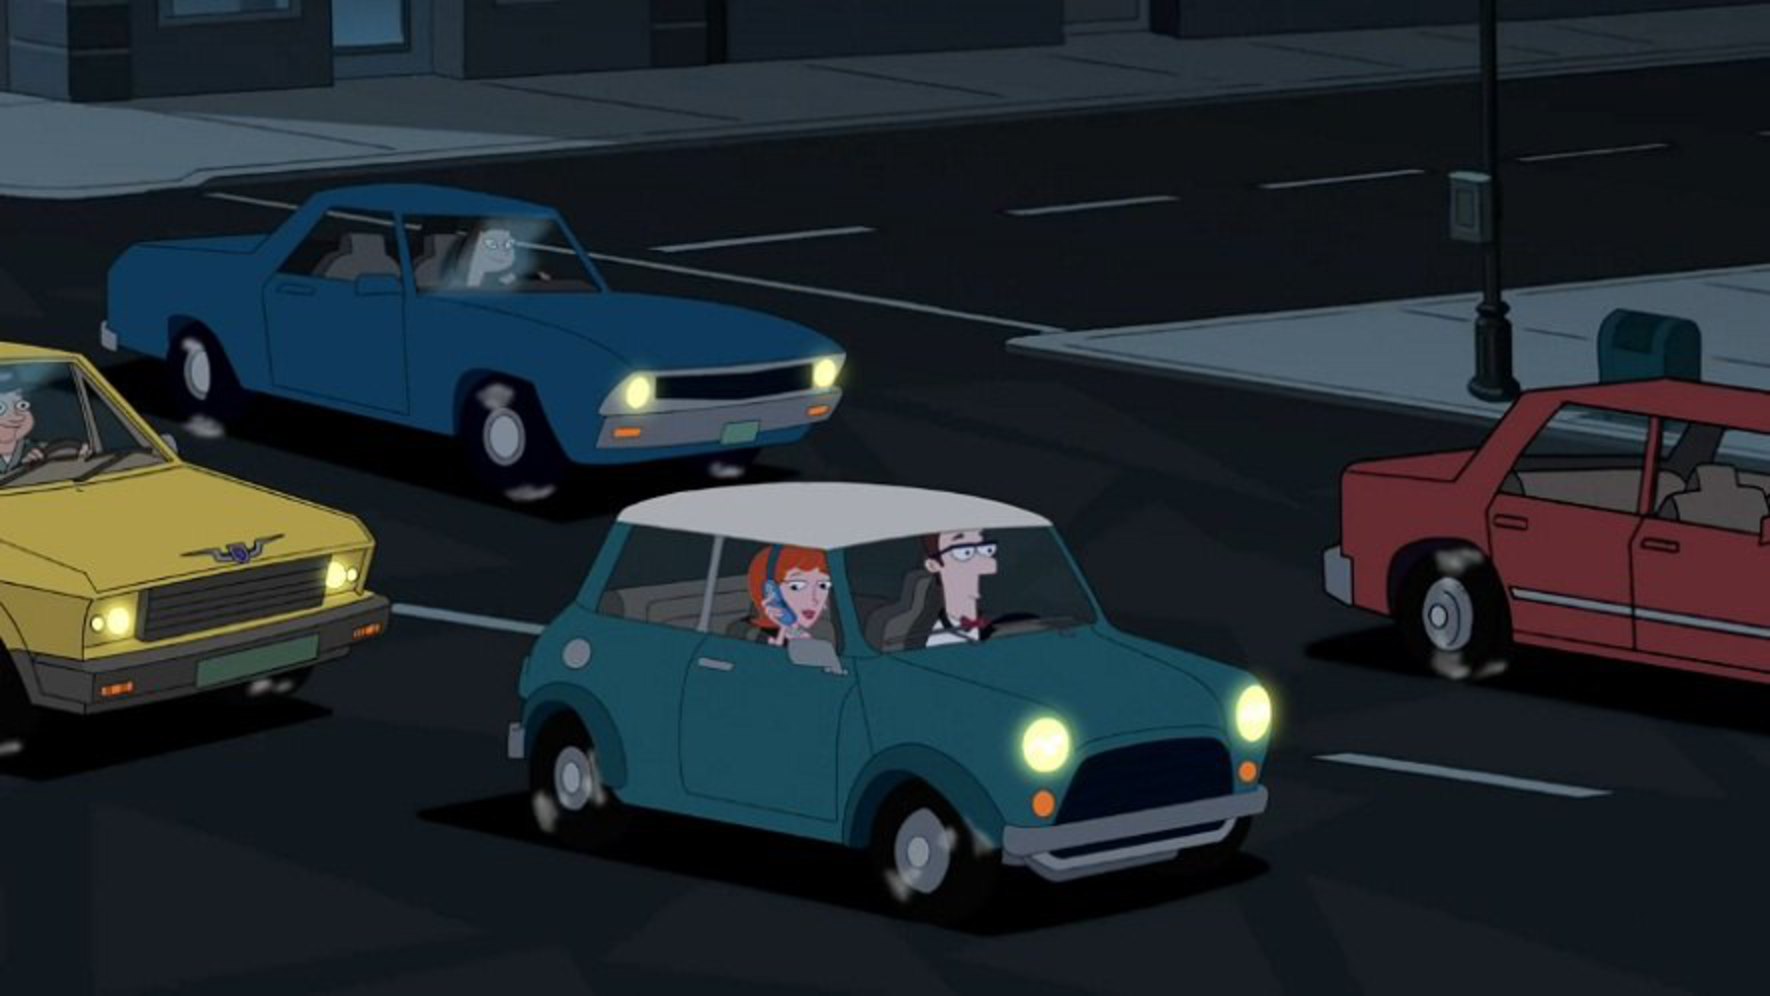 IMCDb.org: Mini unknown in "Phineas And Ferb, 2007-